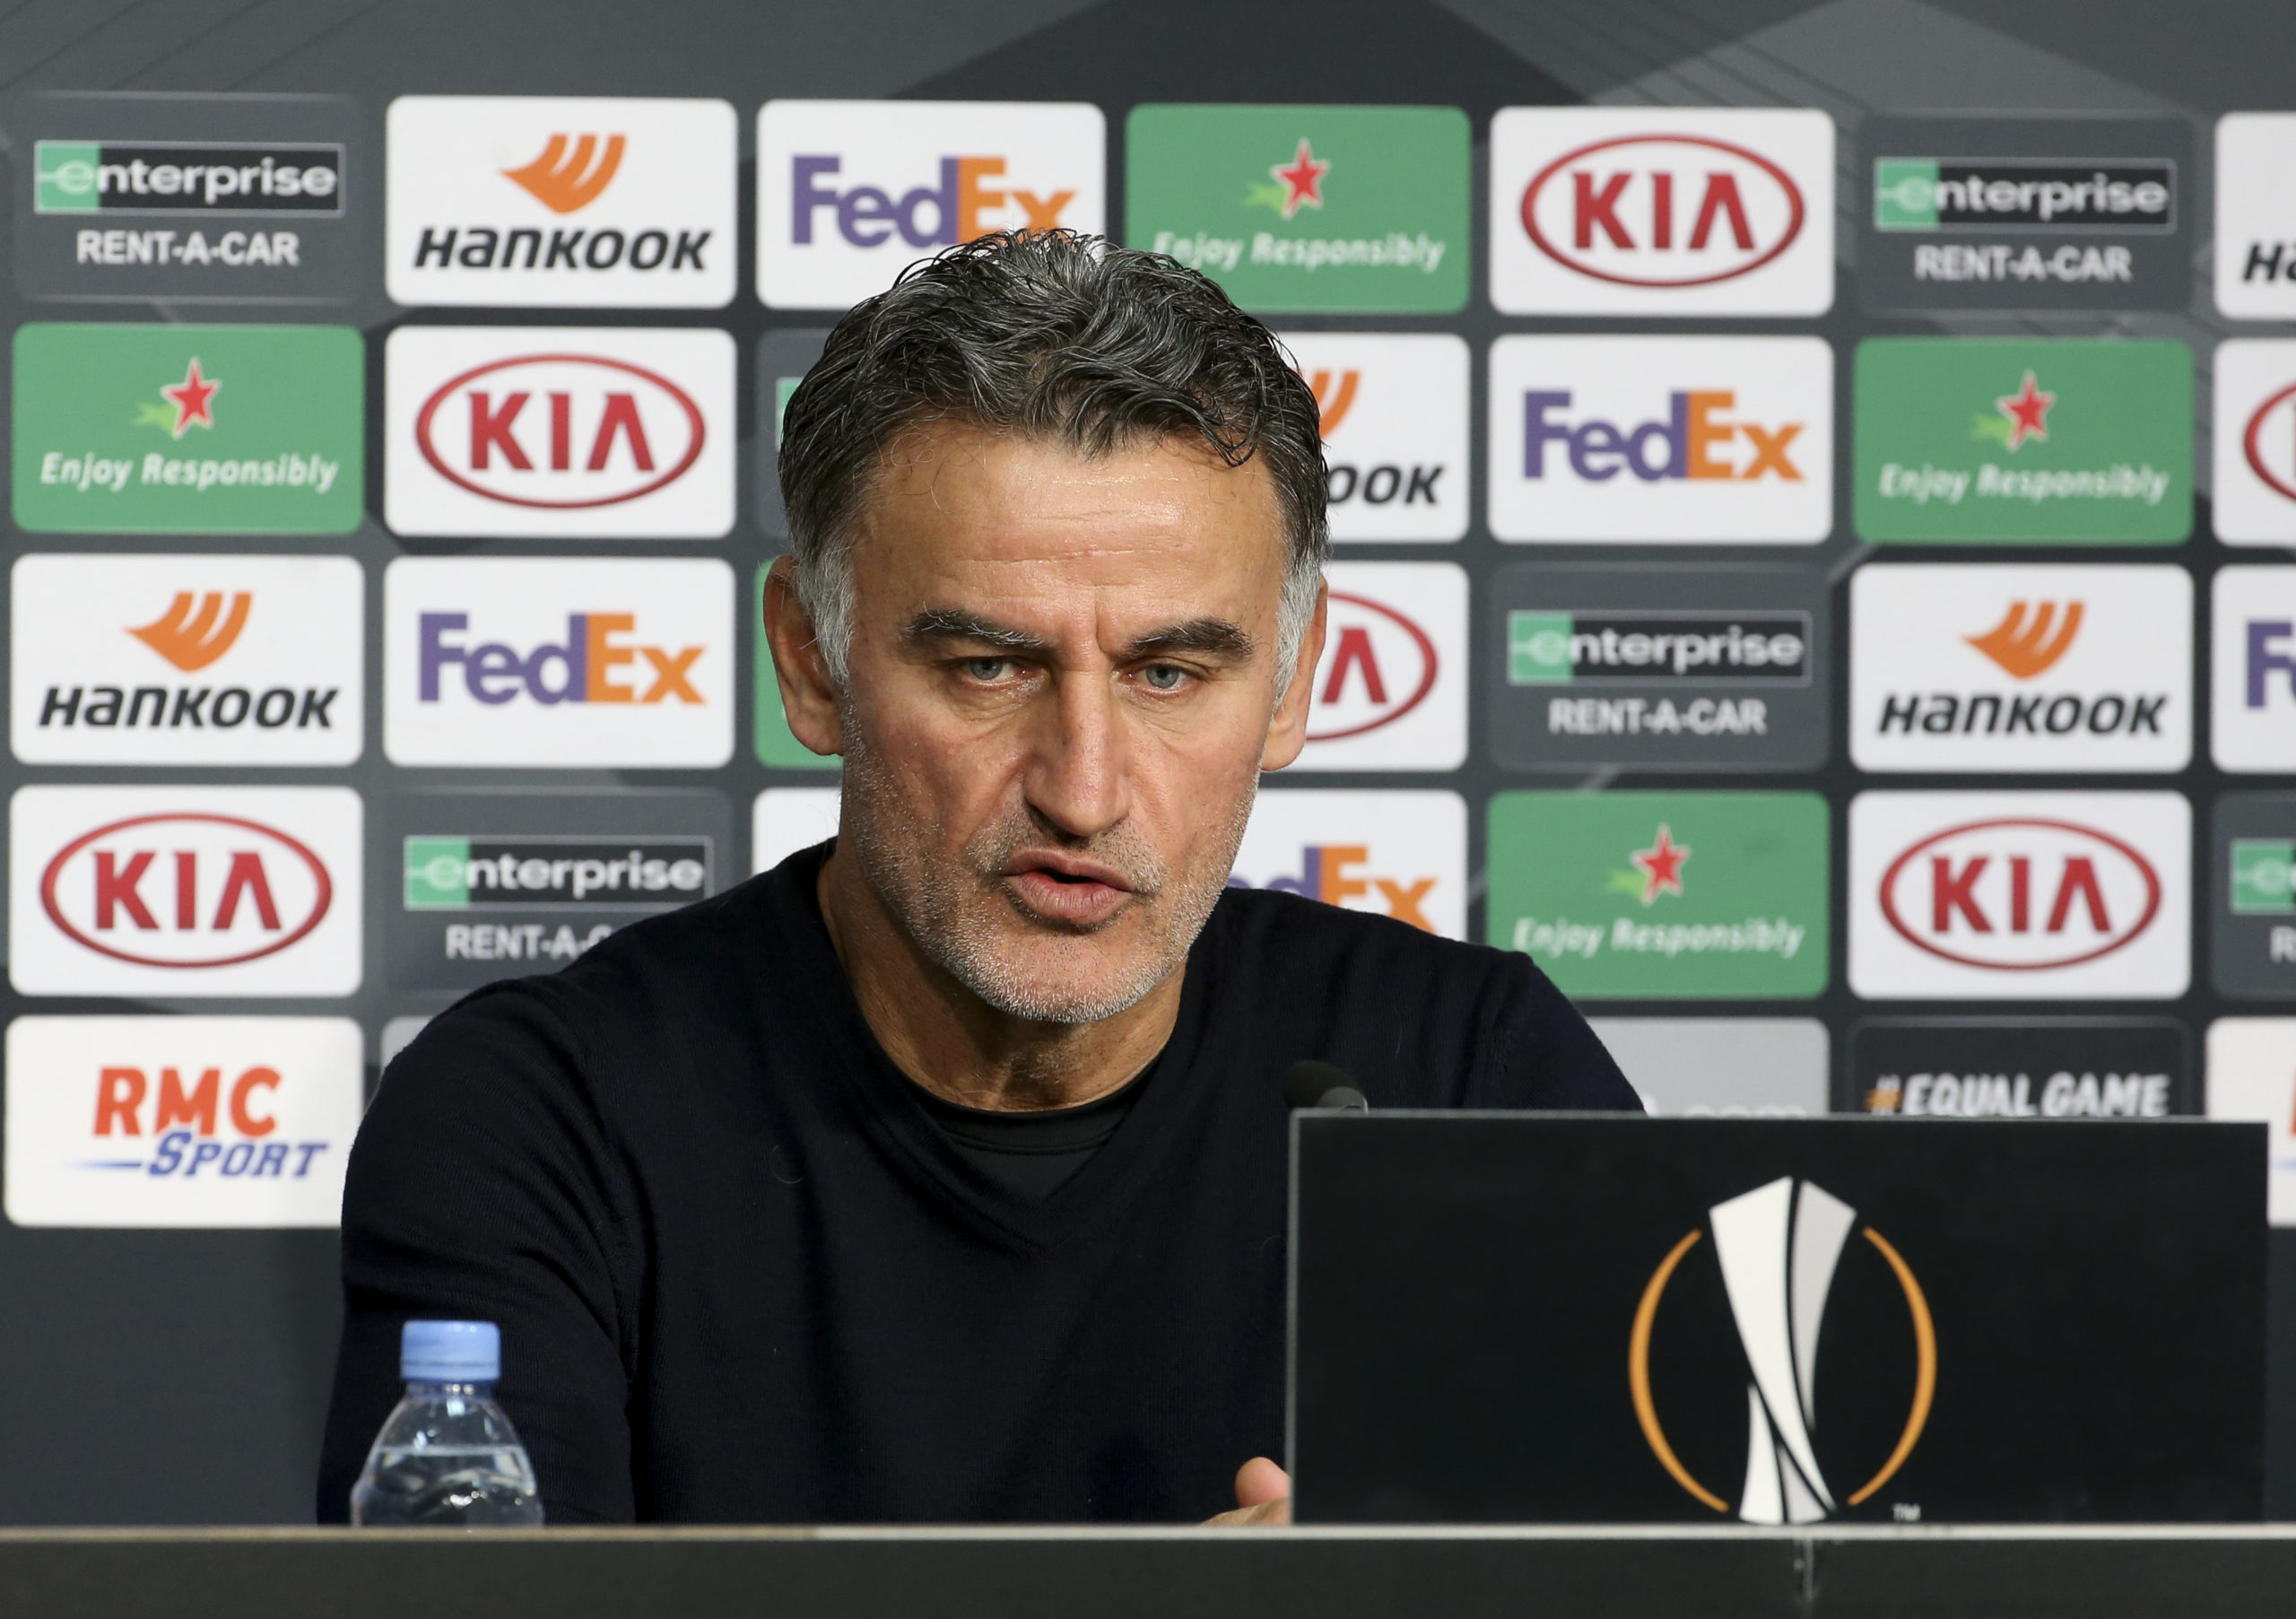 Galtier's pre-Celtic comments: Weah will start, "hairdressers" will not